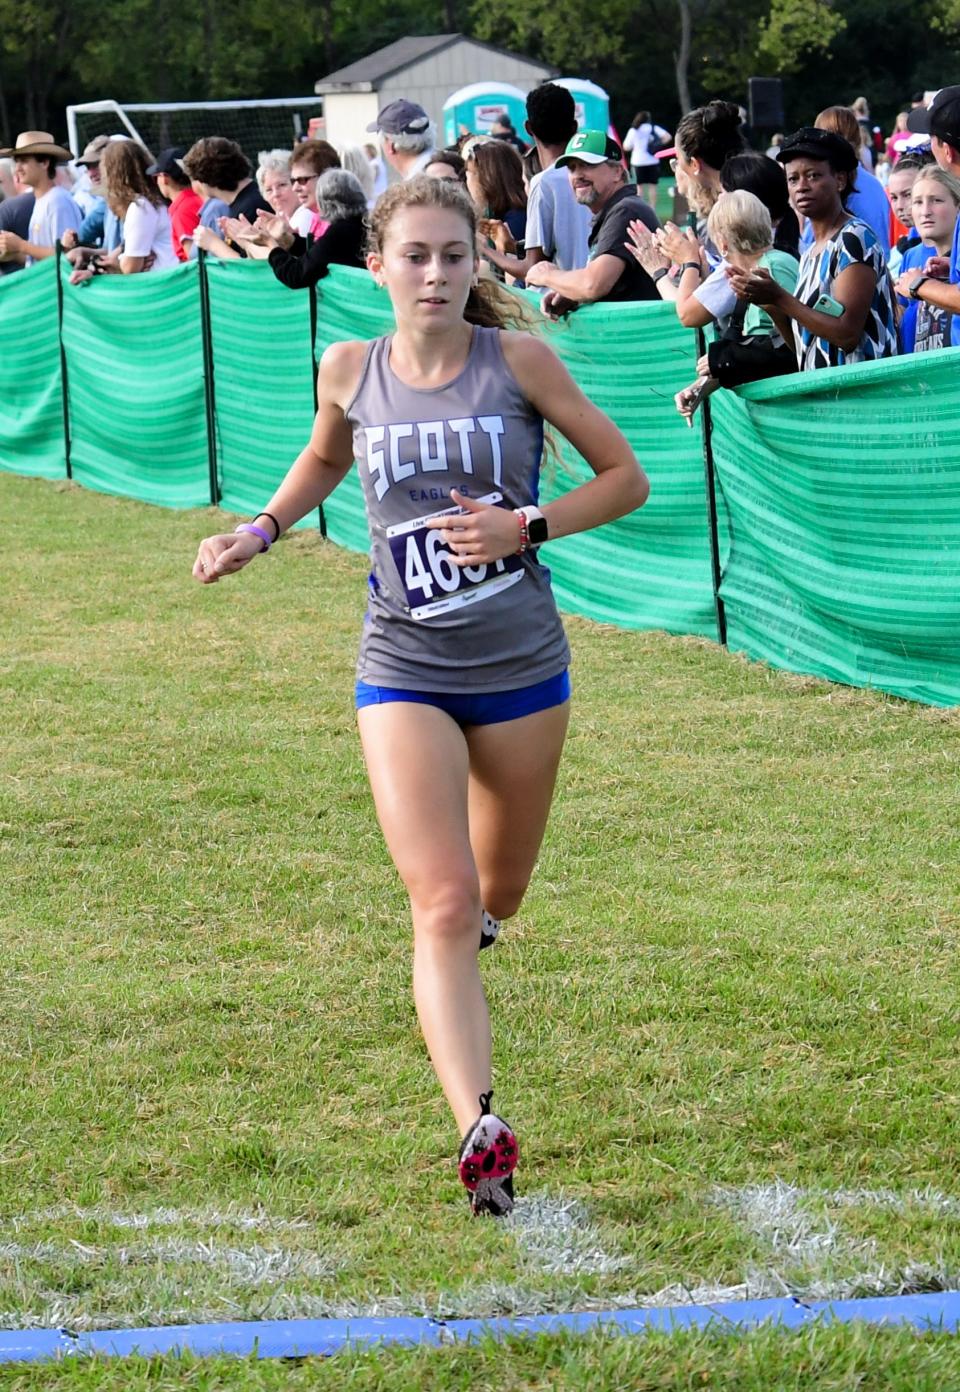 Maddie Strong of Scott is the Northern Kentucky runner of the year after winning the 2A state championship.